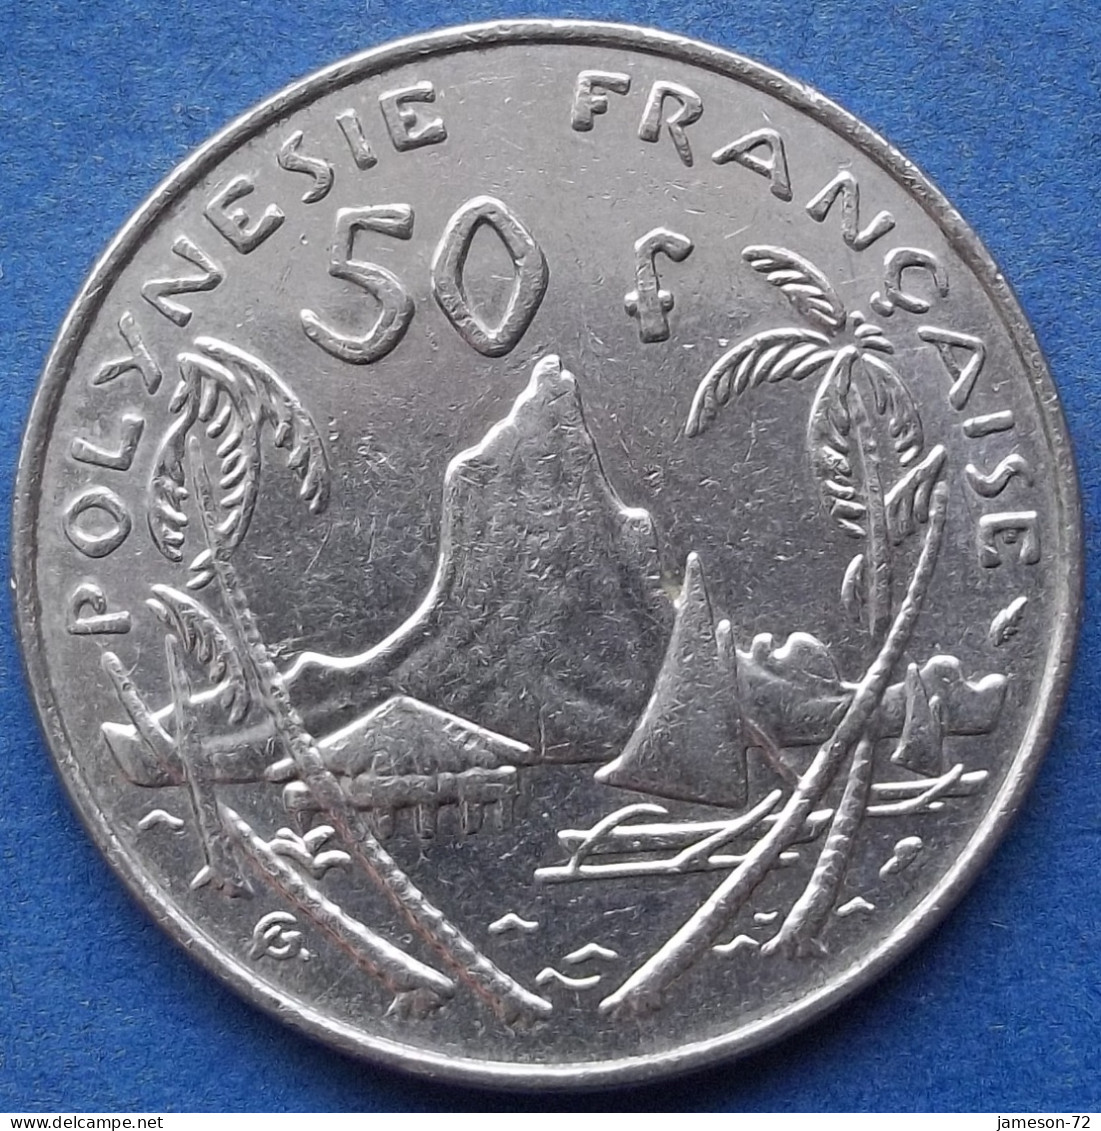 FRENCH POLYNESIA - 50 Francs 1988 "Morea Harbor" KM# 13 French Overseas Territory - Edelweiss Coins - Französisch-Polynesien